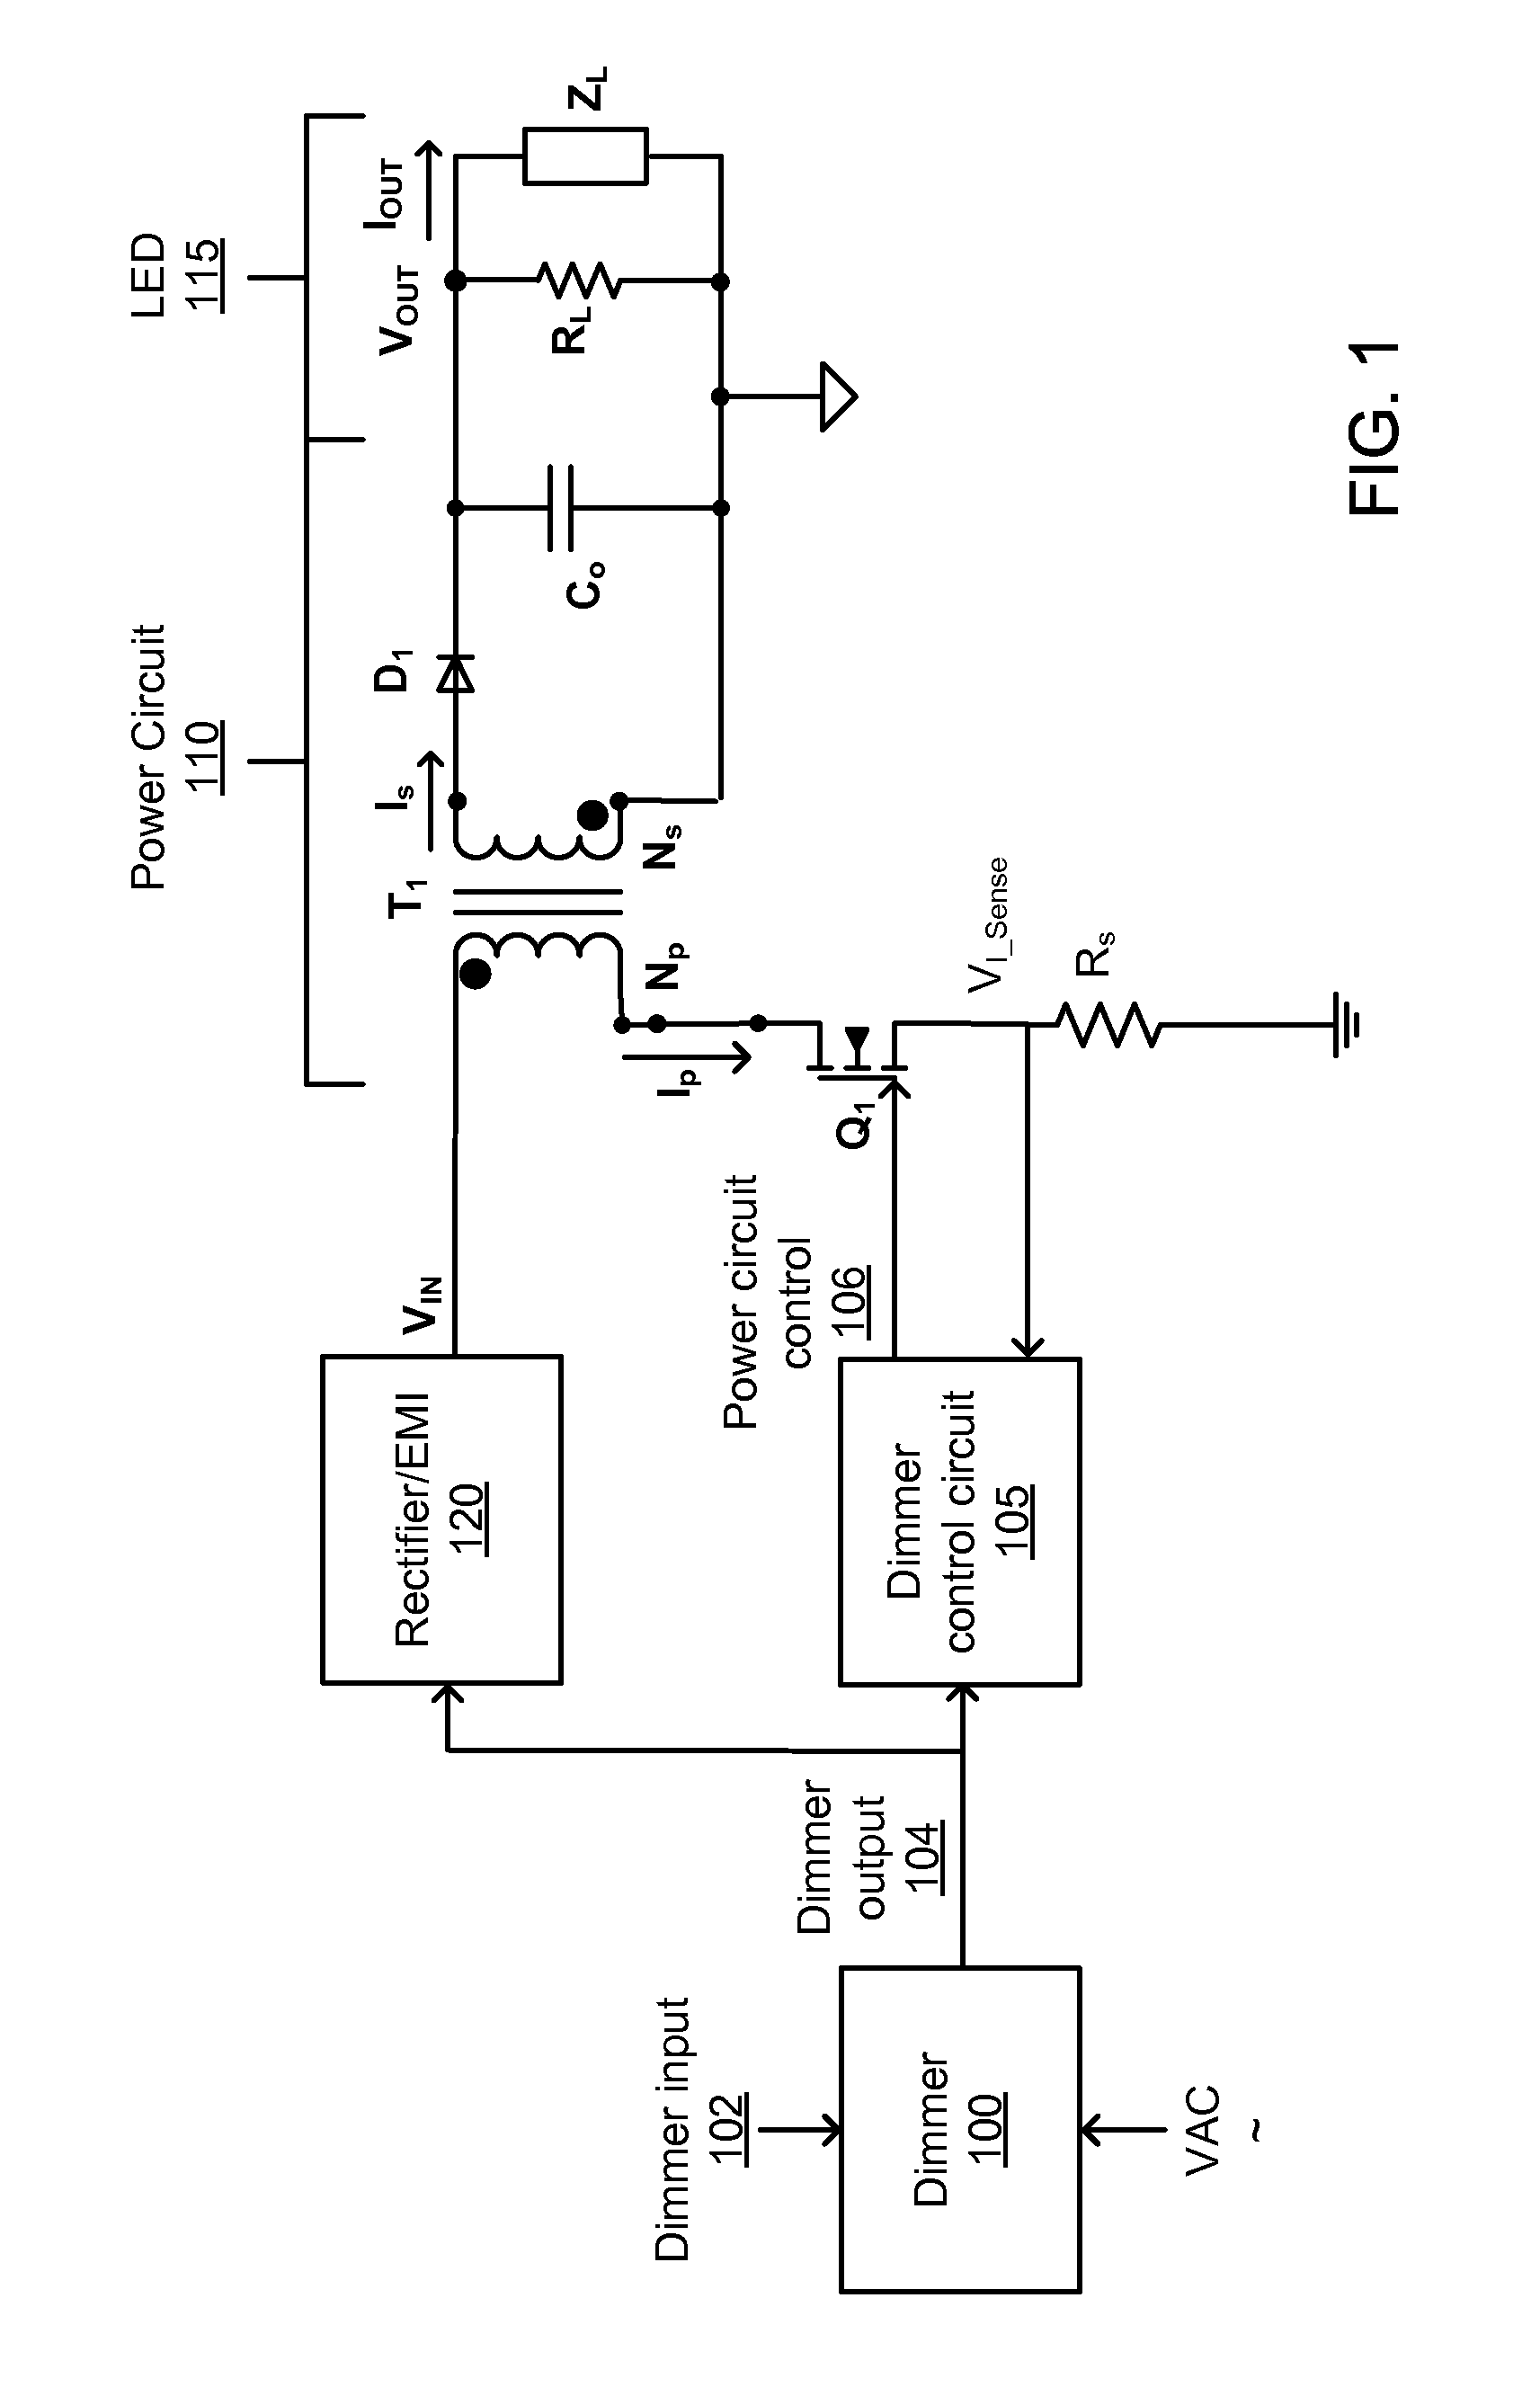 Filter bandwidth adjustment in a multi-loop dimmer control circuit